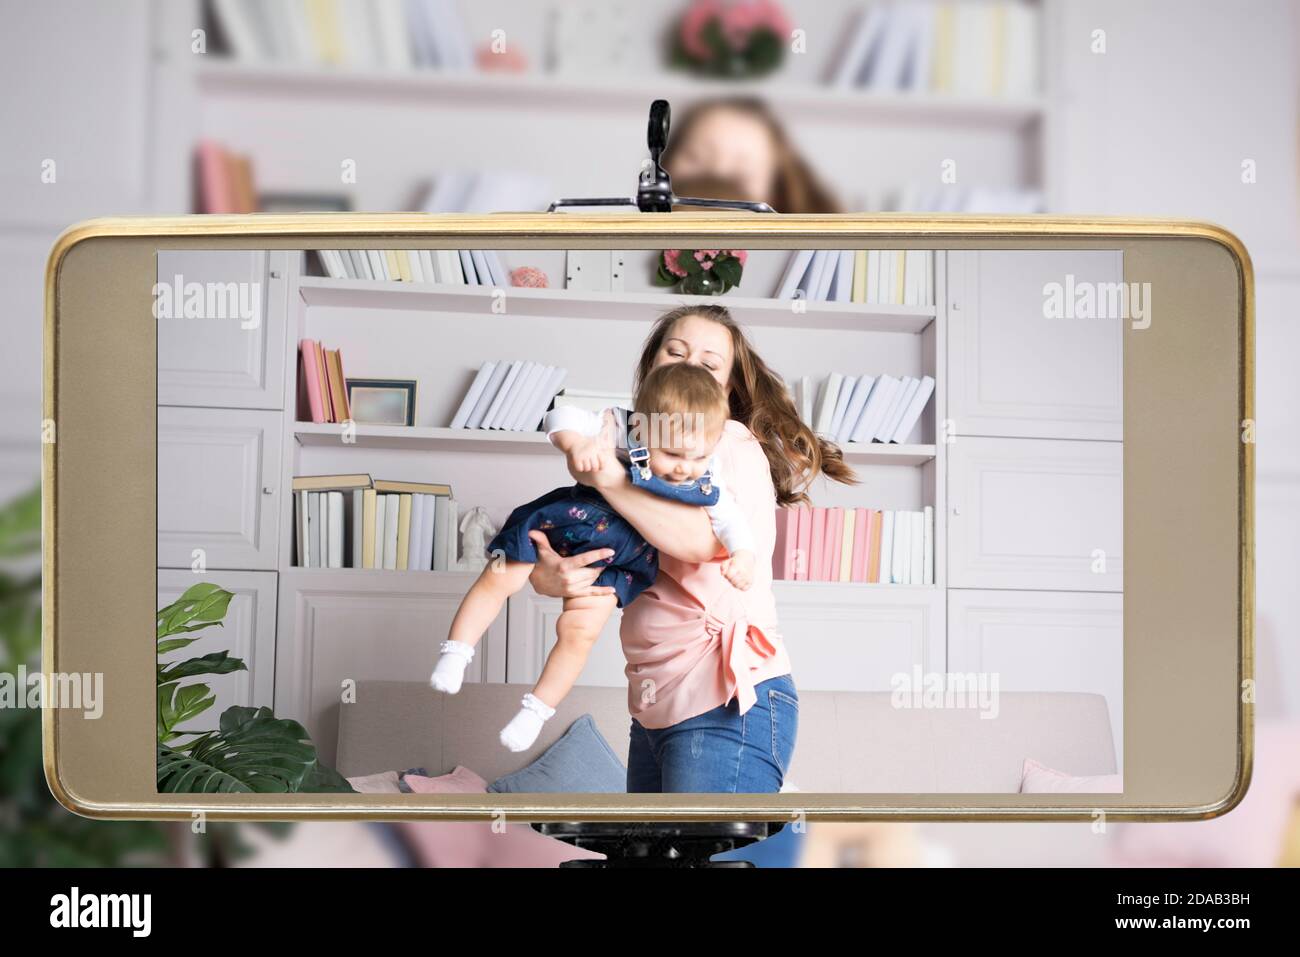 Young female blogger and online influencer live streaming parenting show on social media using a smartphone. Stock Photo